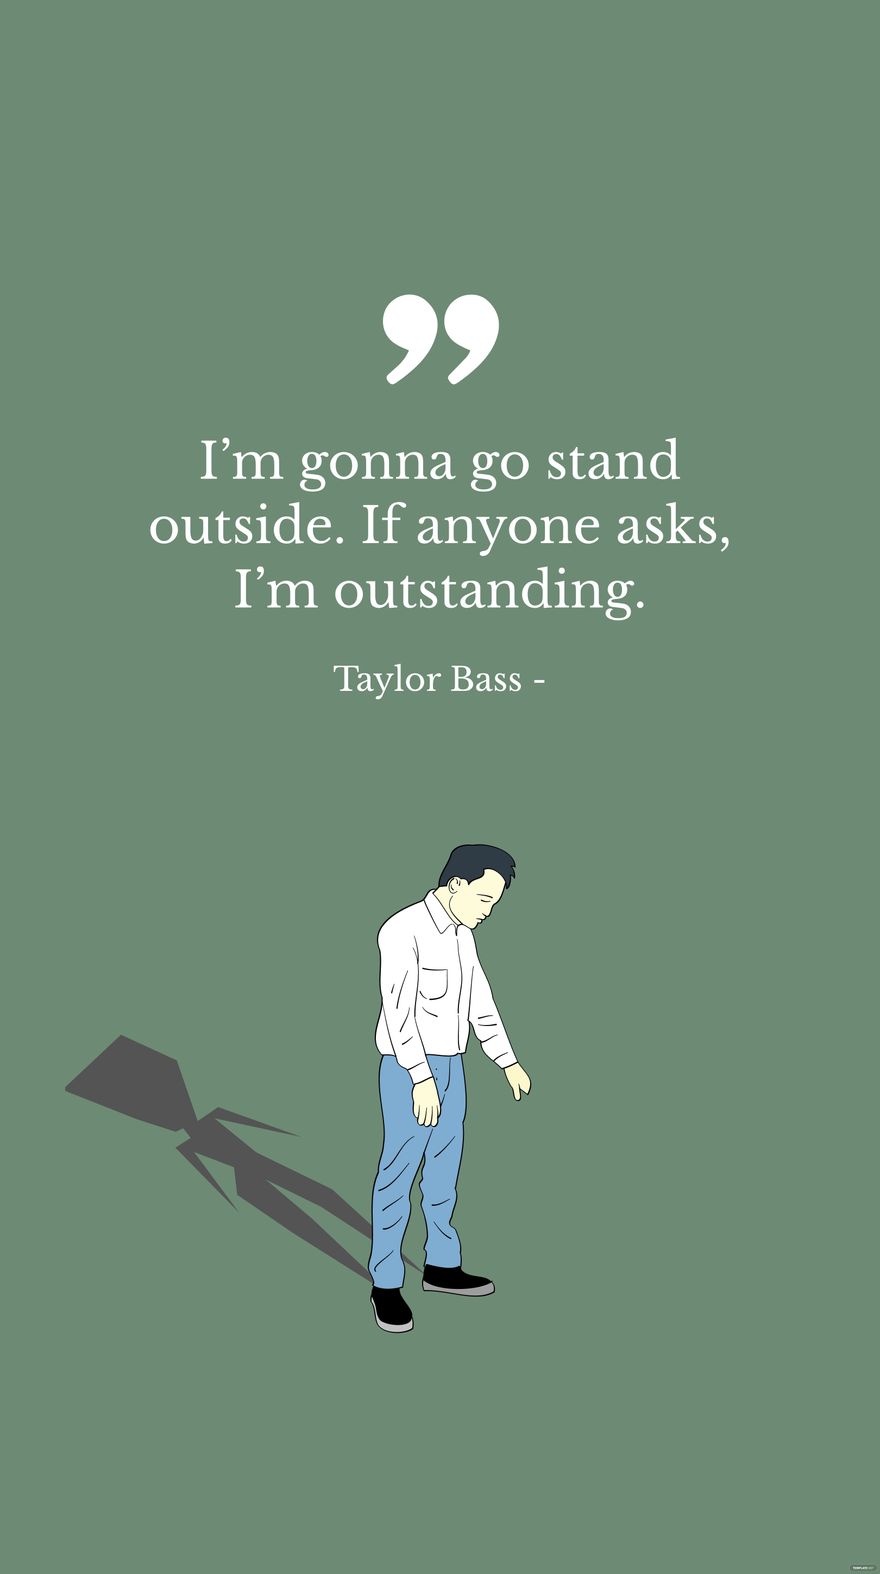 Free Taylor Bass - I’m gonna go stand outside. If anyone asks, I’m outstanding. in JPG